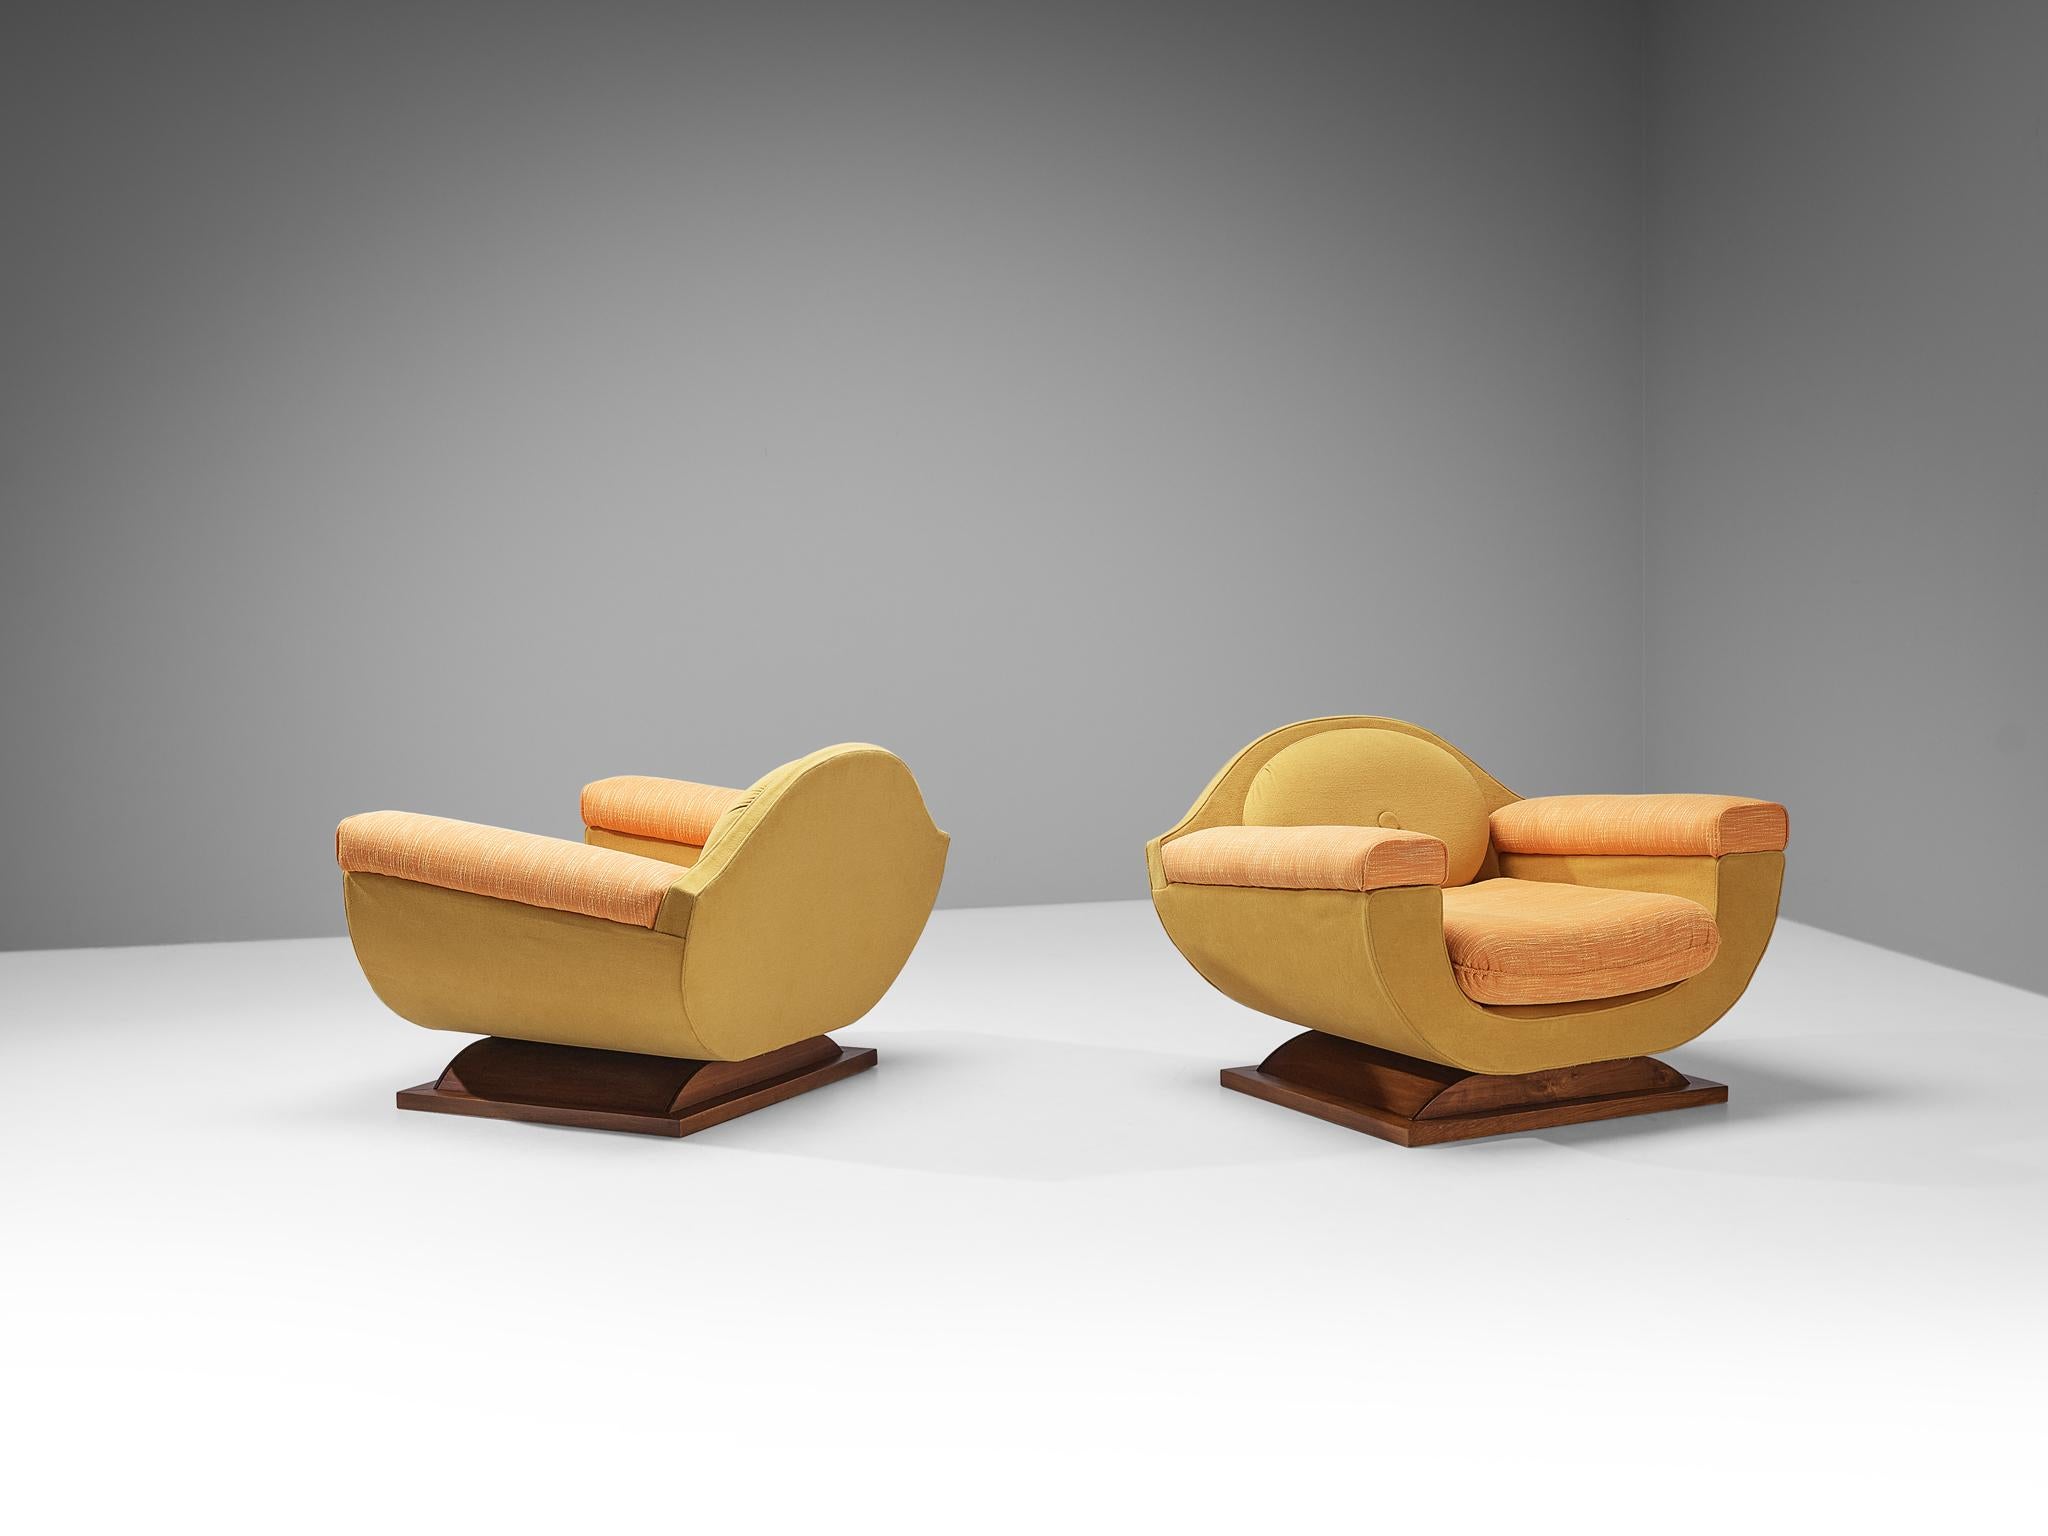 Italian Art Deco Pair of Lounge Chairs in Orange Yellow Upholstery  For Sale 3